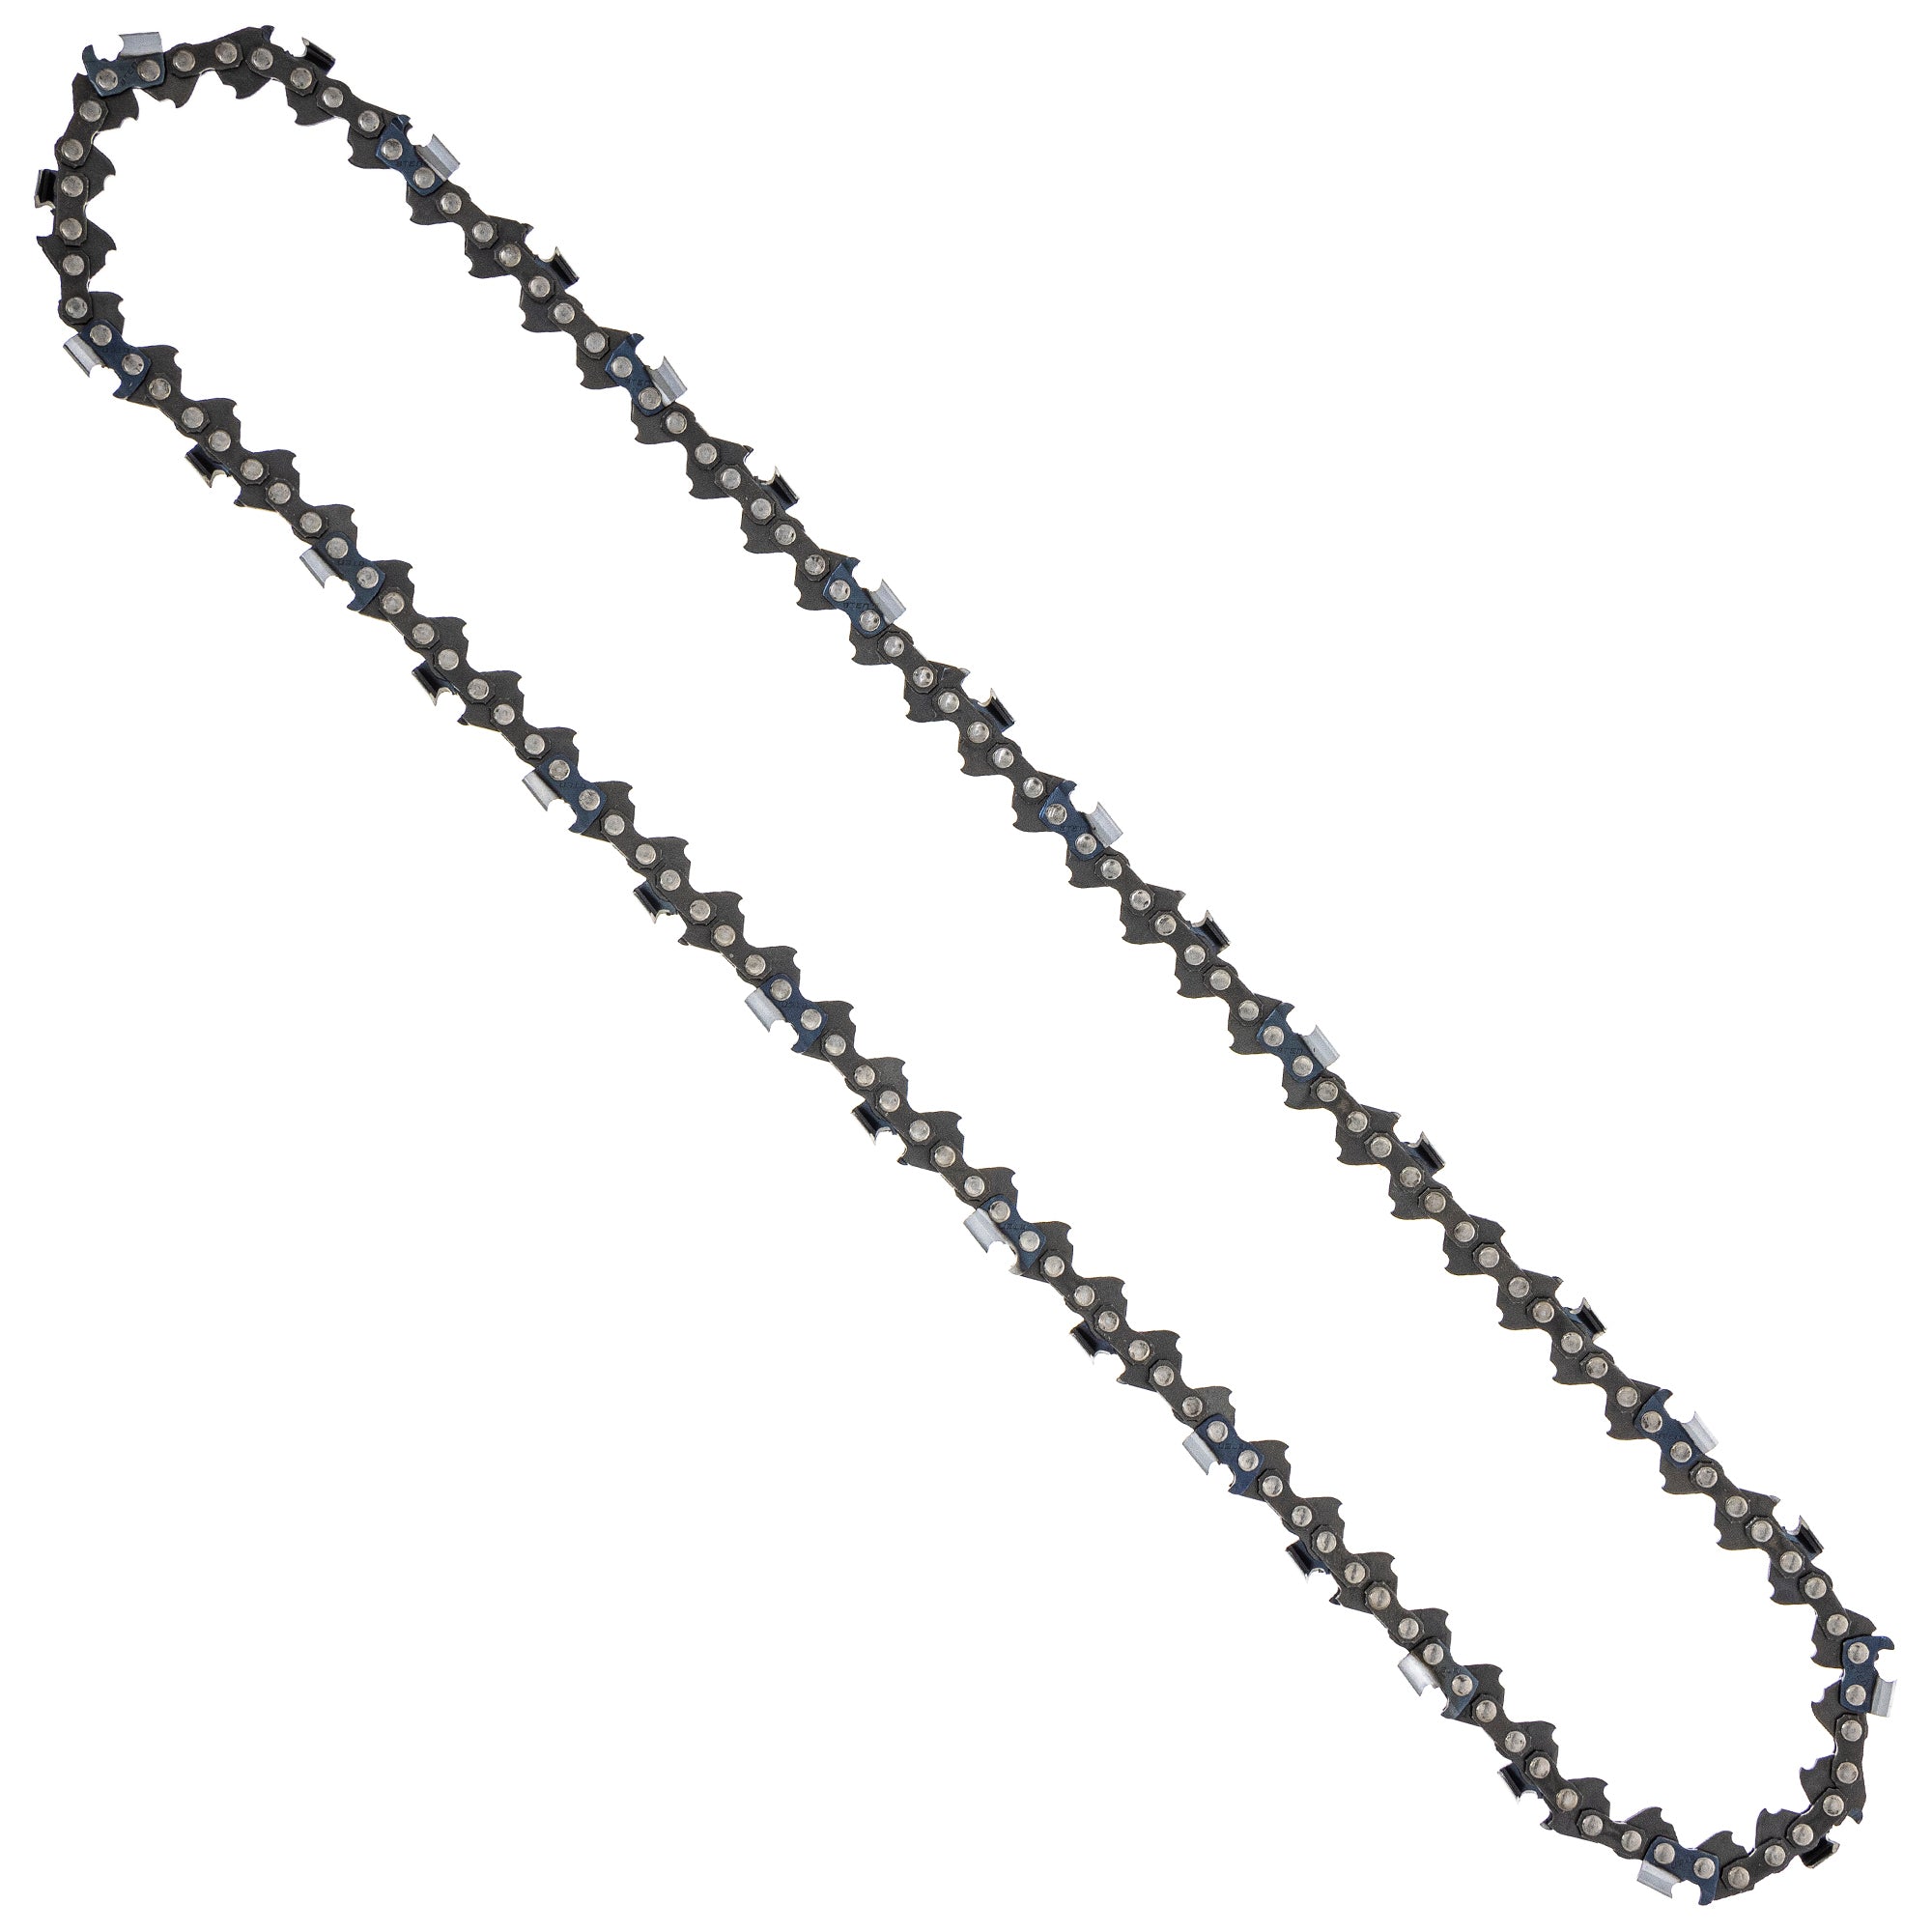 8TEN 810-CCC2298H Chain 2-Pack for zOTHER Oregon MS 634 30 040